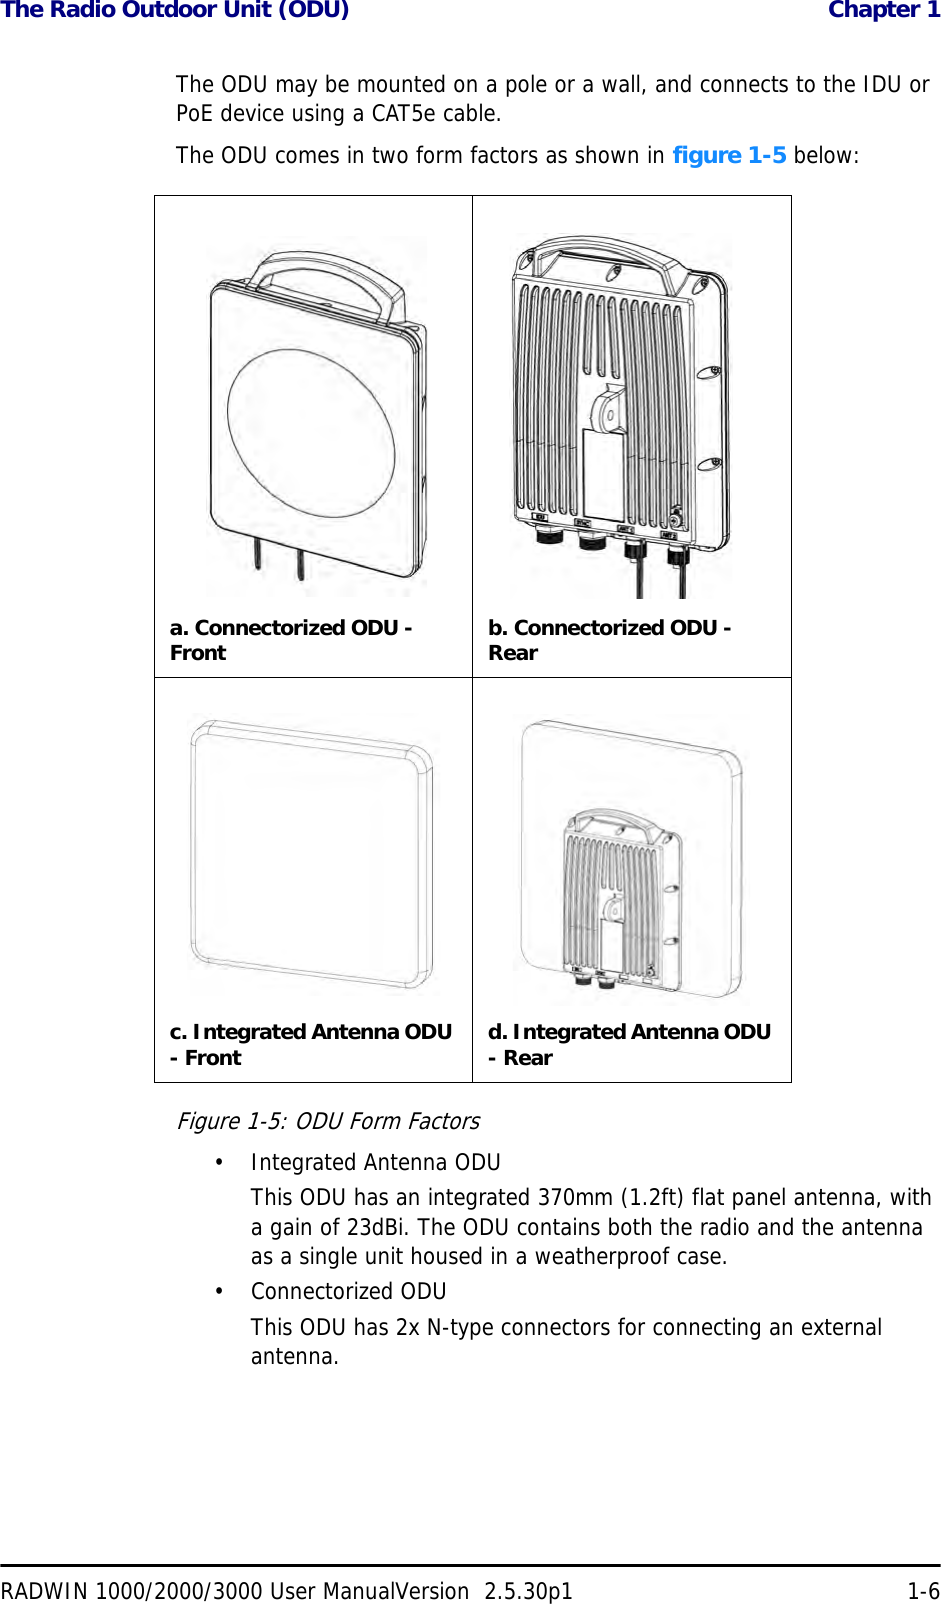 The Radio Outdoor Unit (ODU)  Chapter 1RADWIN 1000/2000/3000 User ManualVersion  2.5.30p1 1-6The ODU may be mounted on a pole or a wall, and connects to the IDU or PoE device using a CAT5e cable.The ODU comes in two form factors as shown in figure 1-5 below:Figure 1-5: ODU Form Factors• Integrated Antenna ODUThis ODU has an integrated 370mm (1.2ft) flat panel antenna, with a gain of 23dBi. The ODU contains both the radio and the antenna as a single unit housed in a weatherproof case.•Connectorized ODUThis ODU has 2x N-type connectors for connecting an external antenna.a. Connectorized ODU - Front b. Connectorized ODU - Rearc. Integrated Antenna ODU - Front d. Integrated Antenna ODU - Rear